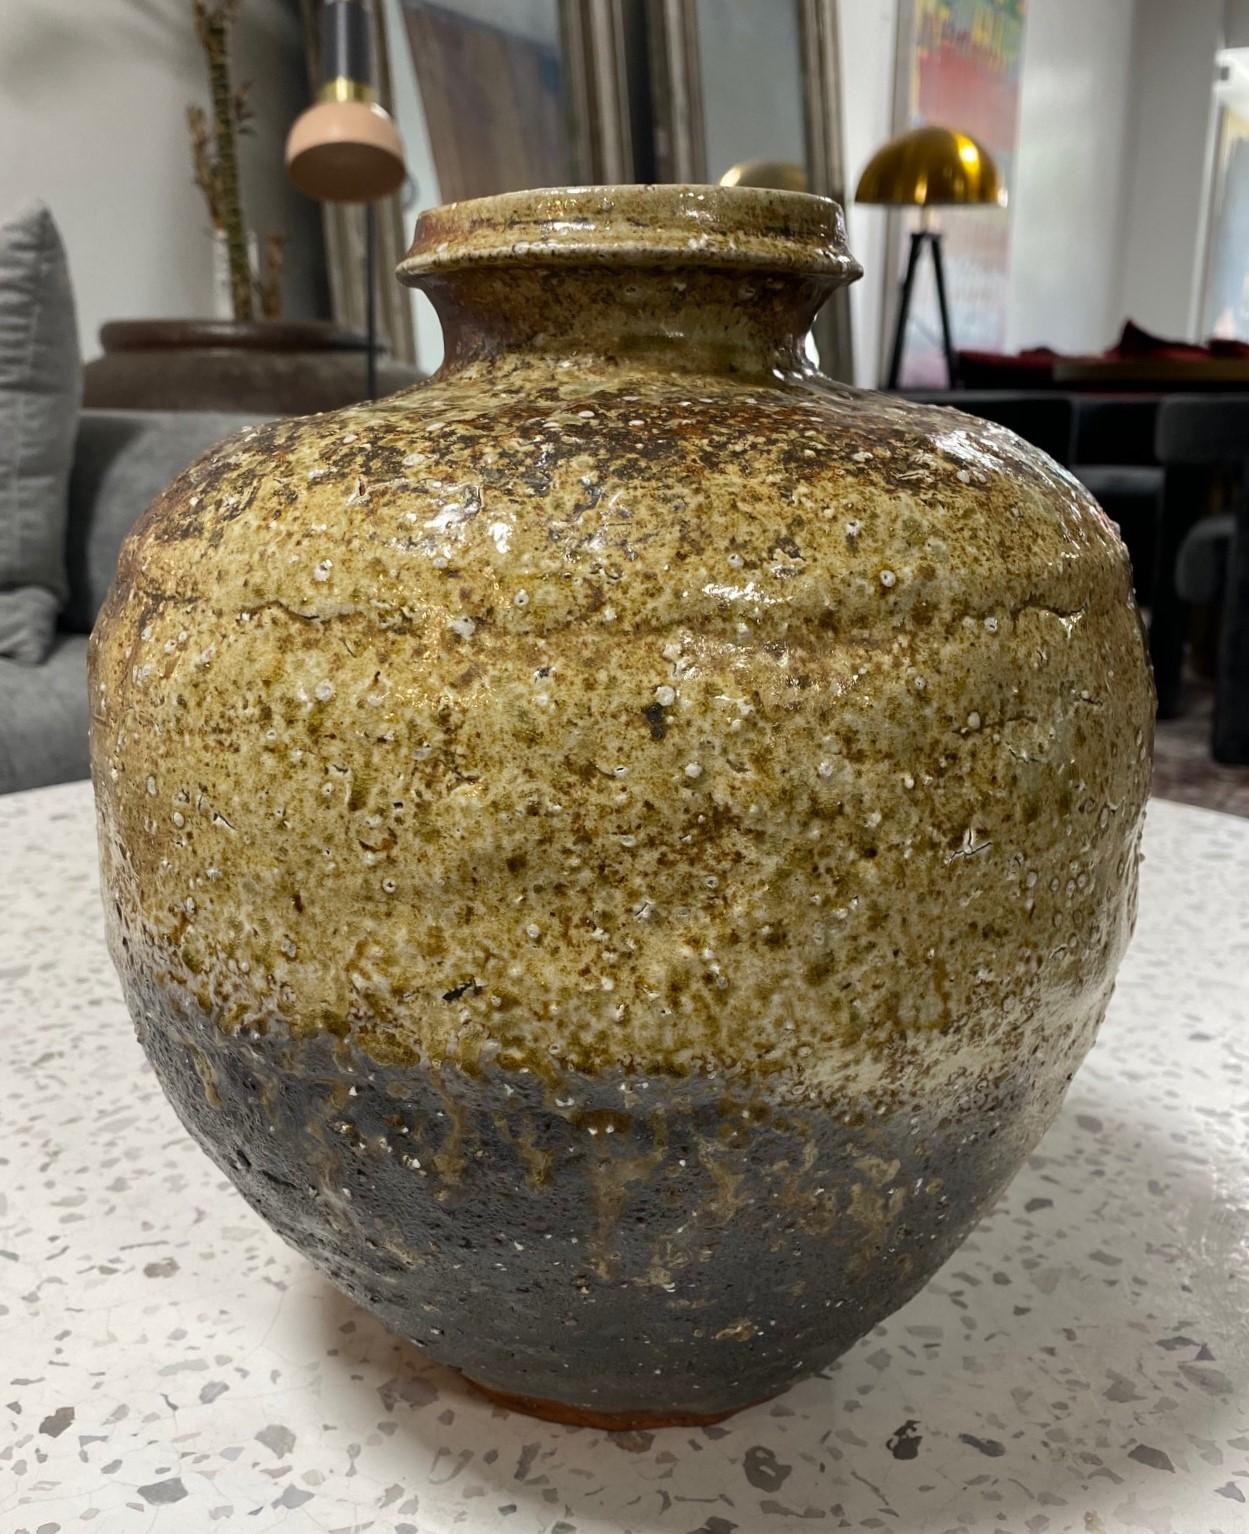 This gorgeously shaped organically glazed stoneware Shigaraki tsubo jar/vase is truly a stunning and unique work - one of our personal favorites. The natural, organic dripping ash glaze radiates in the light. This is a very unique glaze that